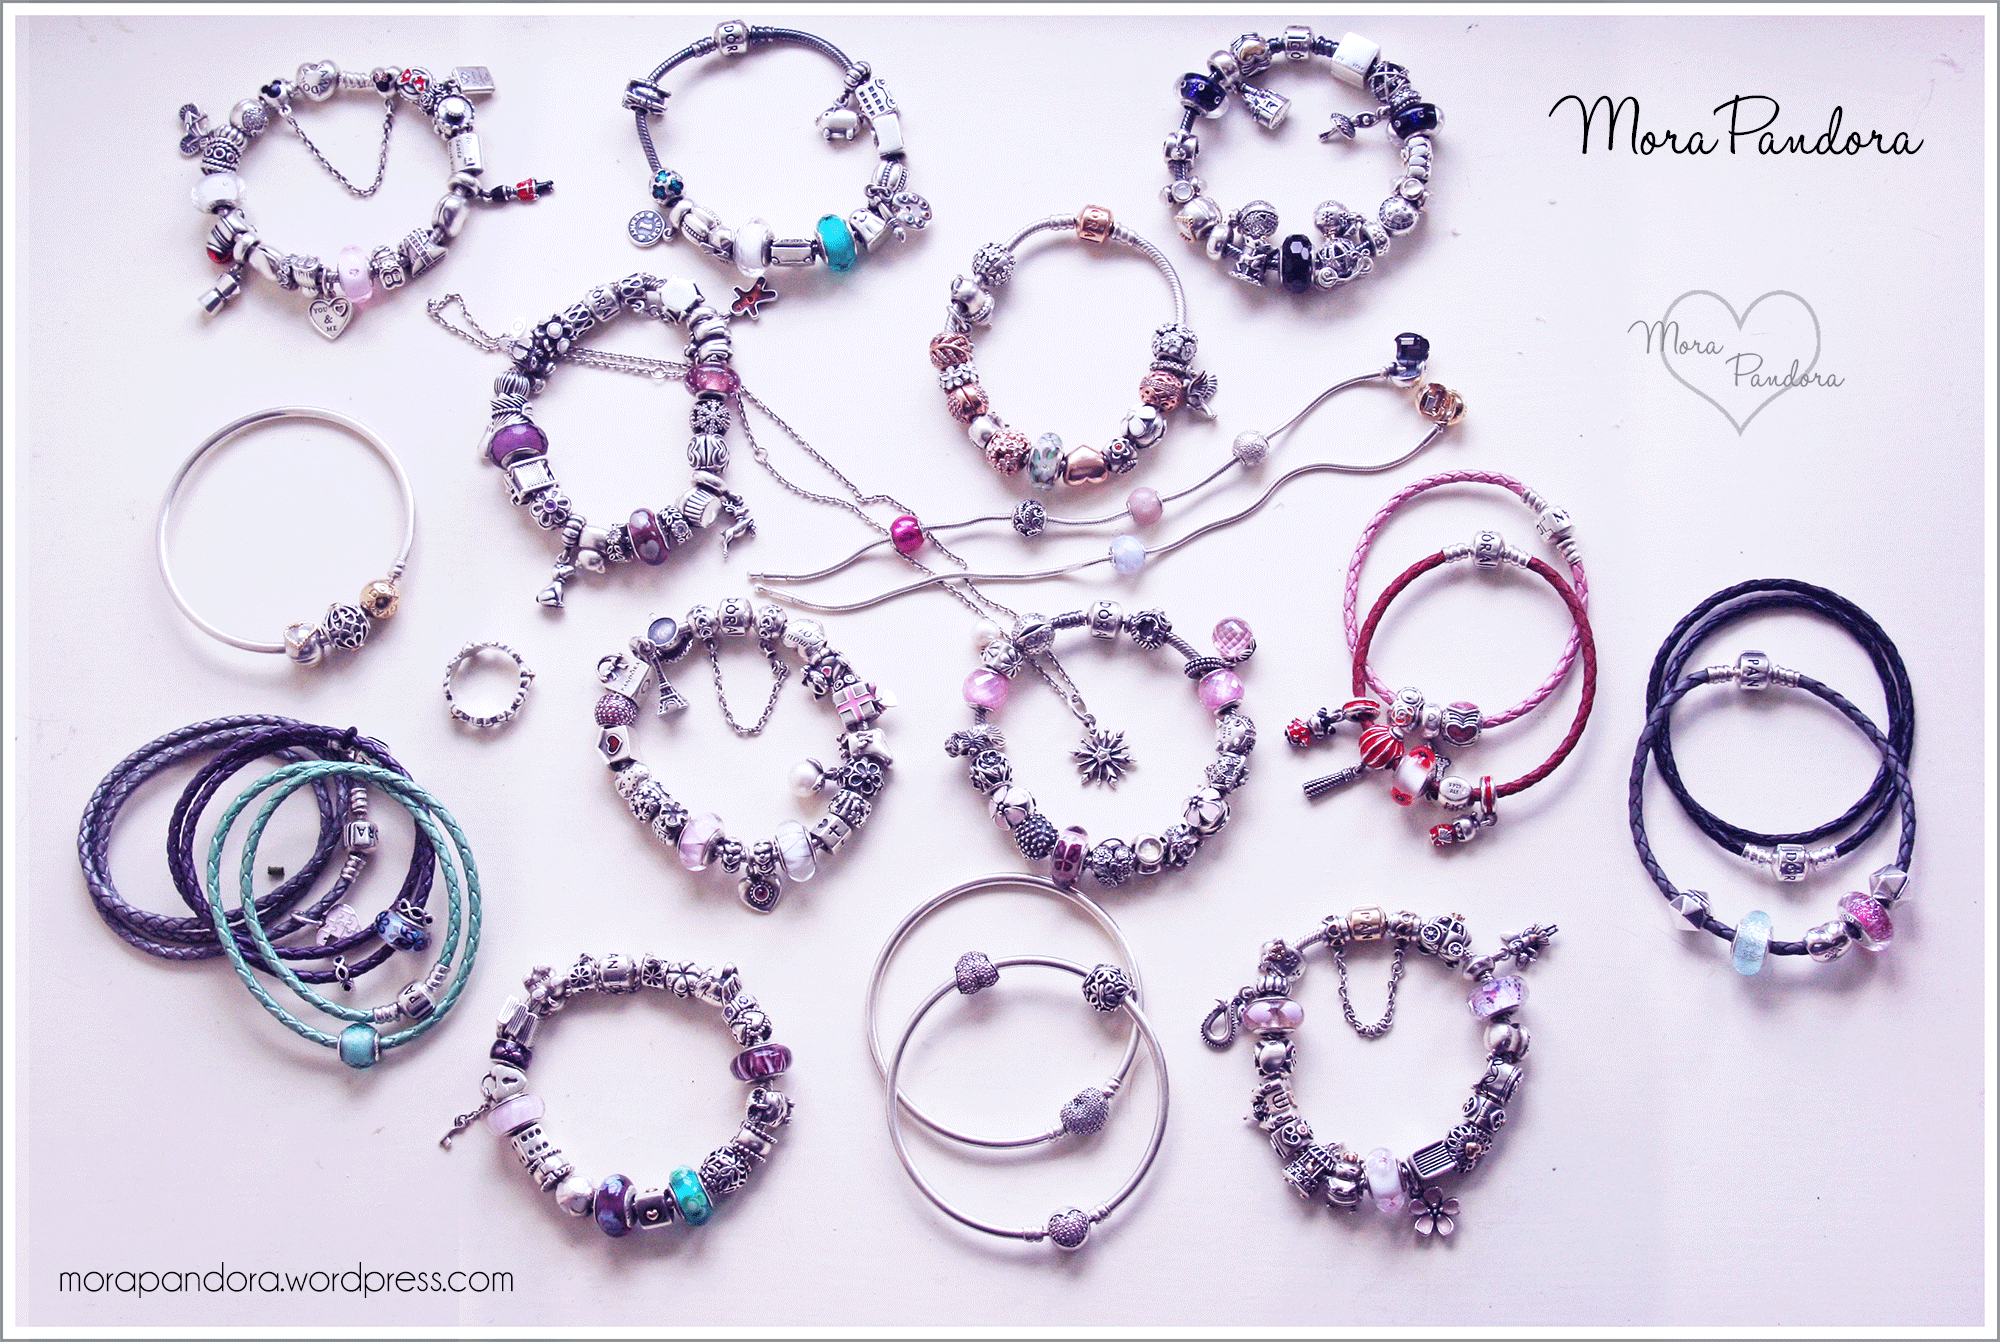 pandora-my-collection-june-2015-resized-2